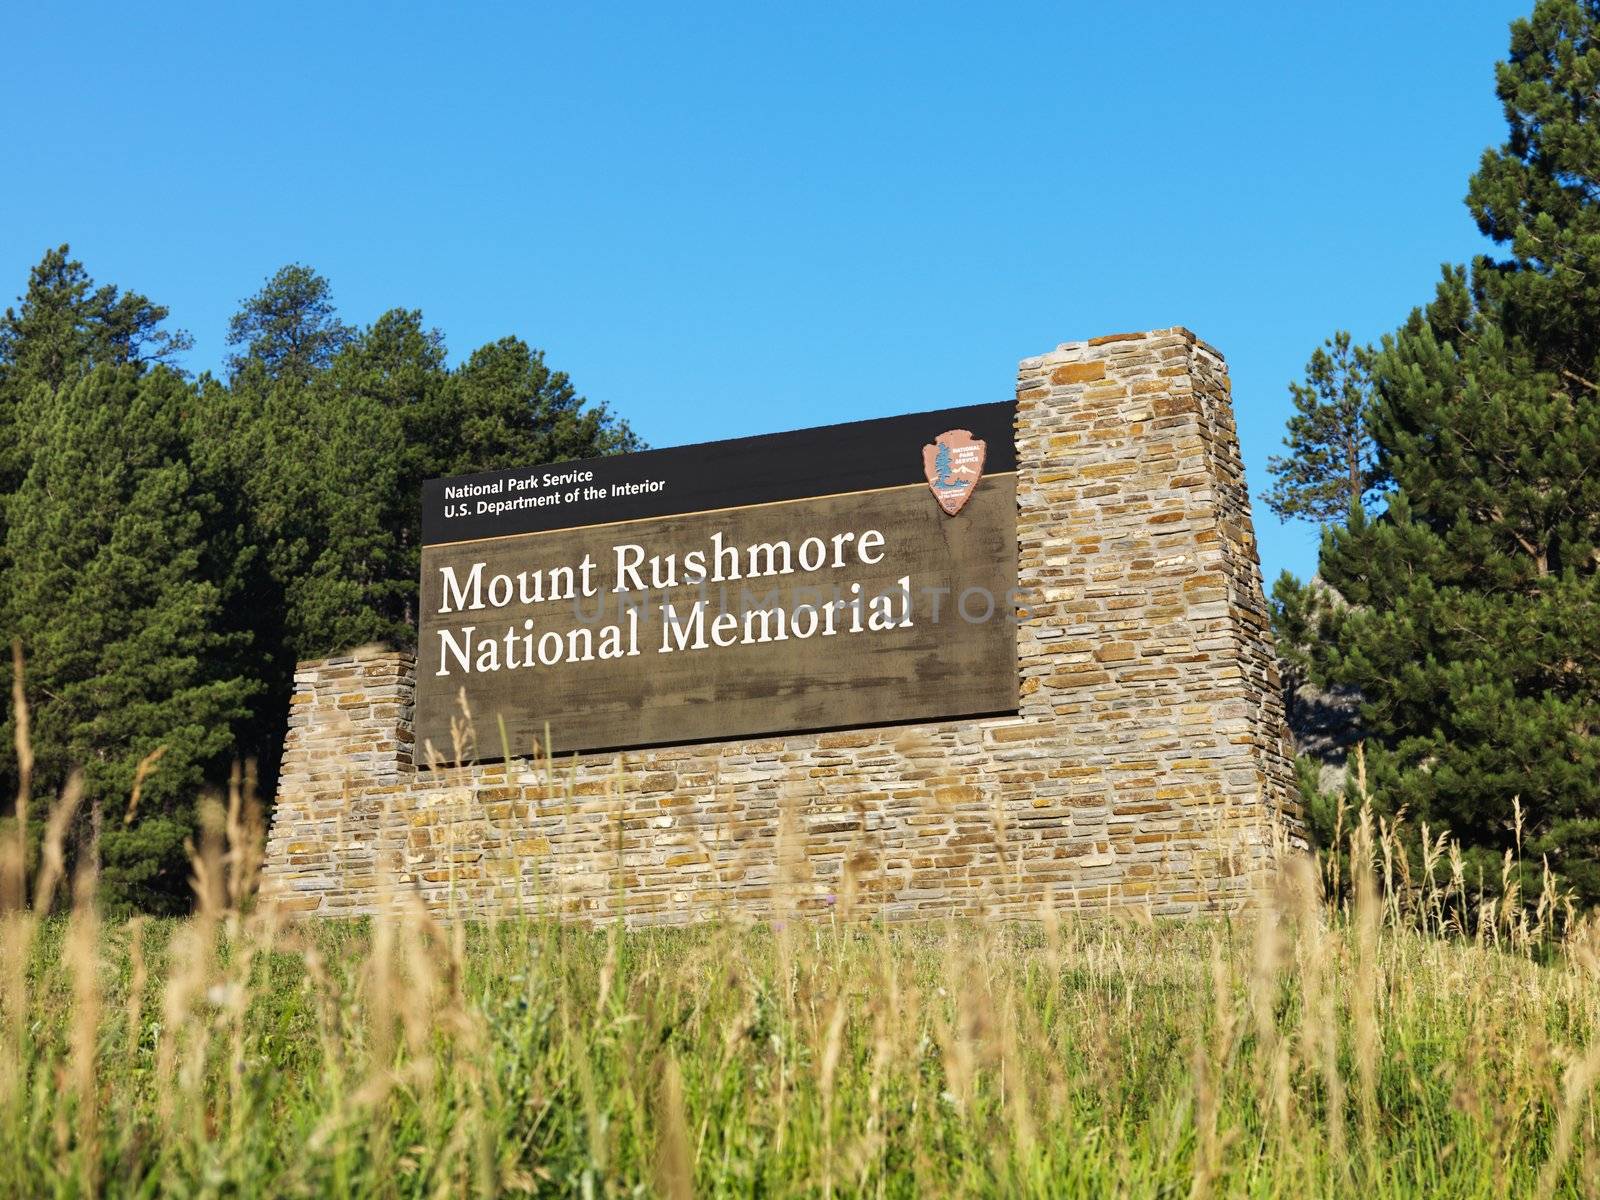 Mount Rushmore sign. by iofoto